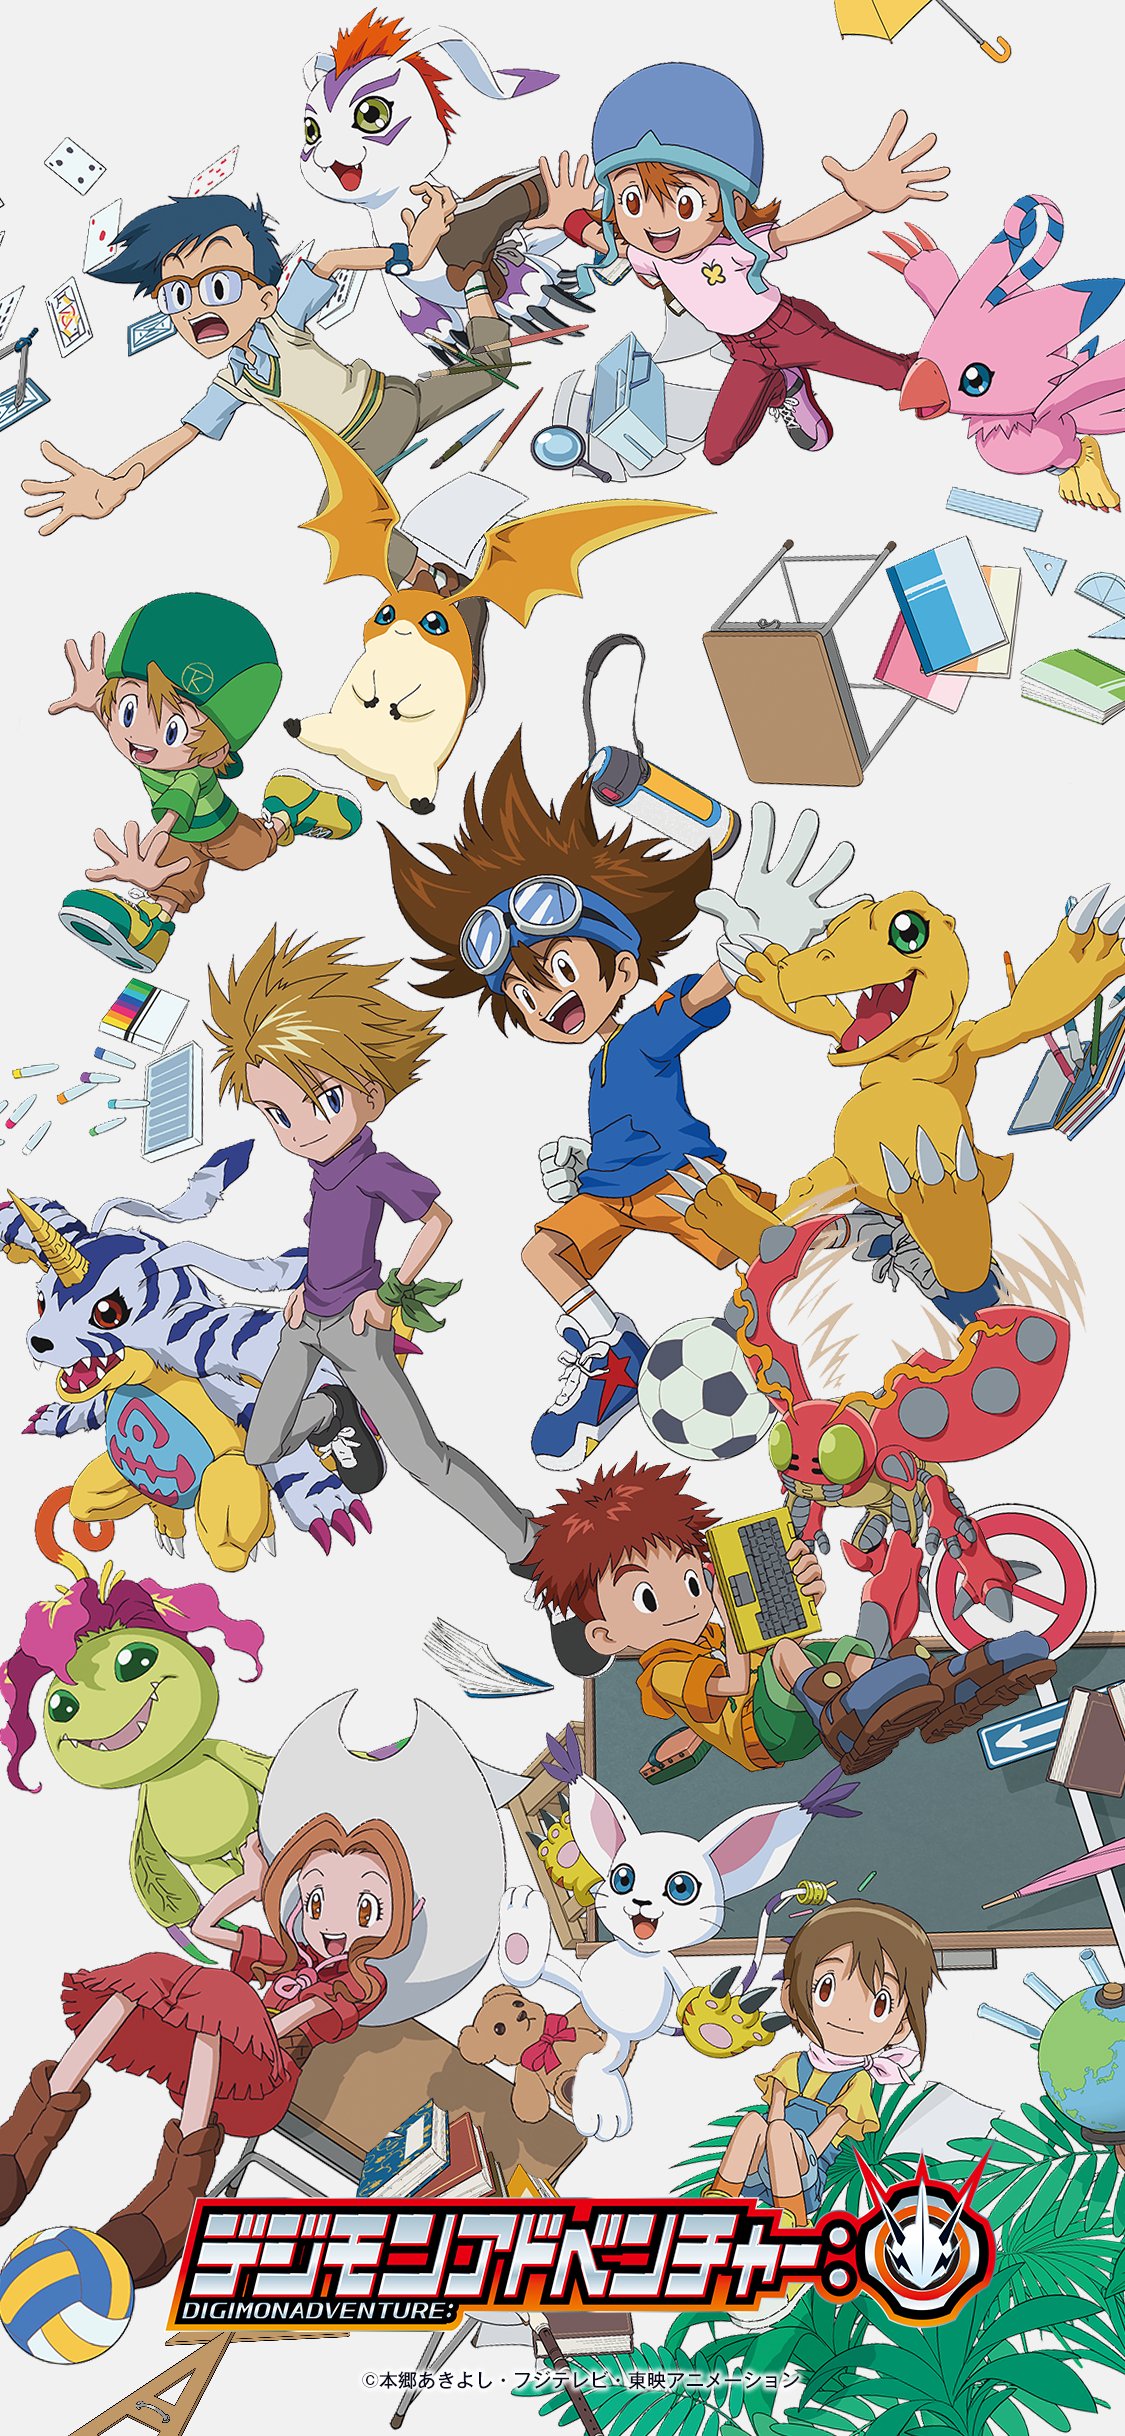 With the Will Digimon Forums, News, Podcast Adventure: premieres today! Under half an hour for Japan, and just a few hours for most of us! A few details to